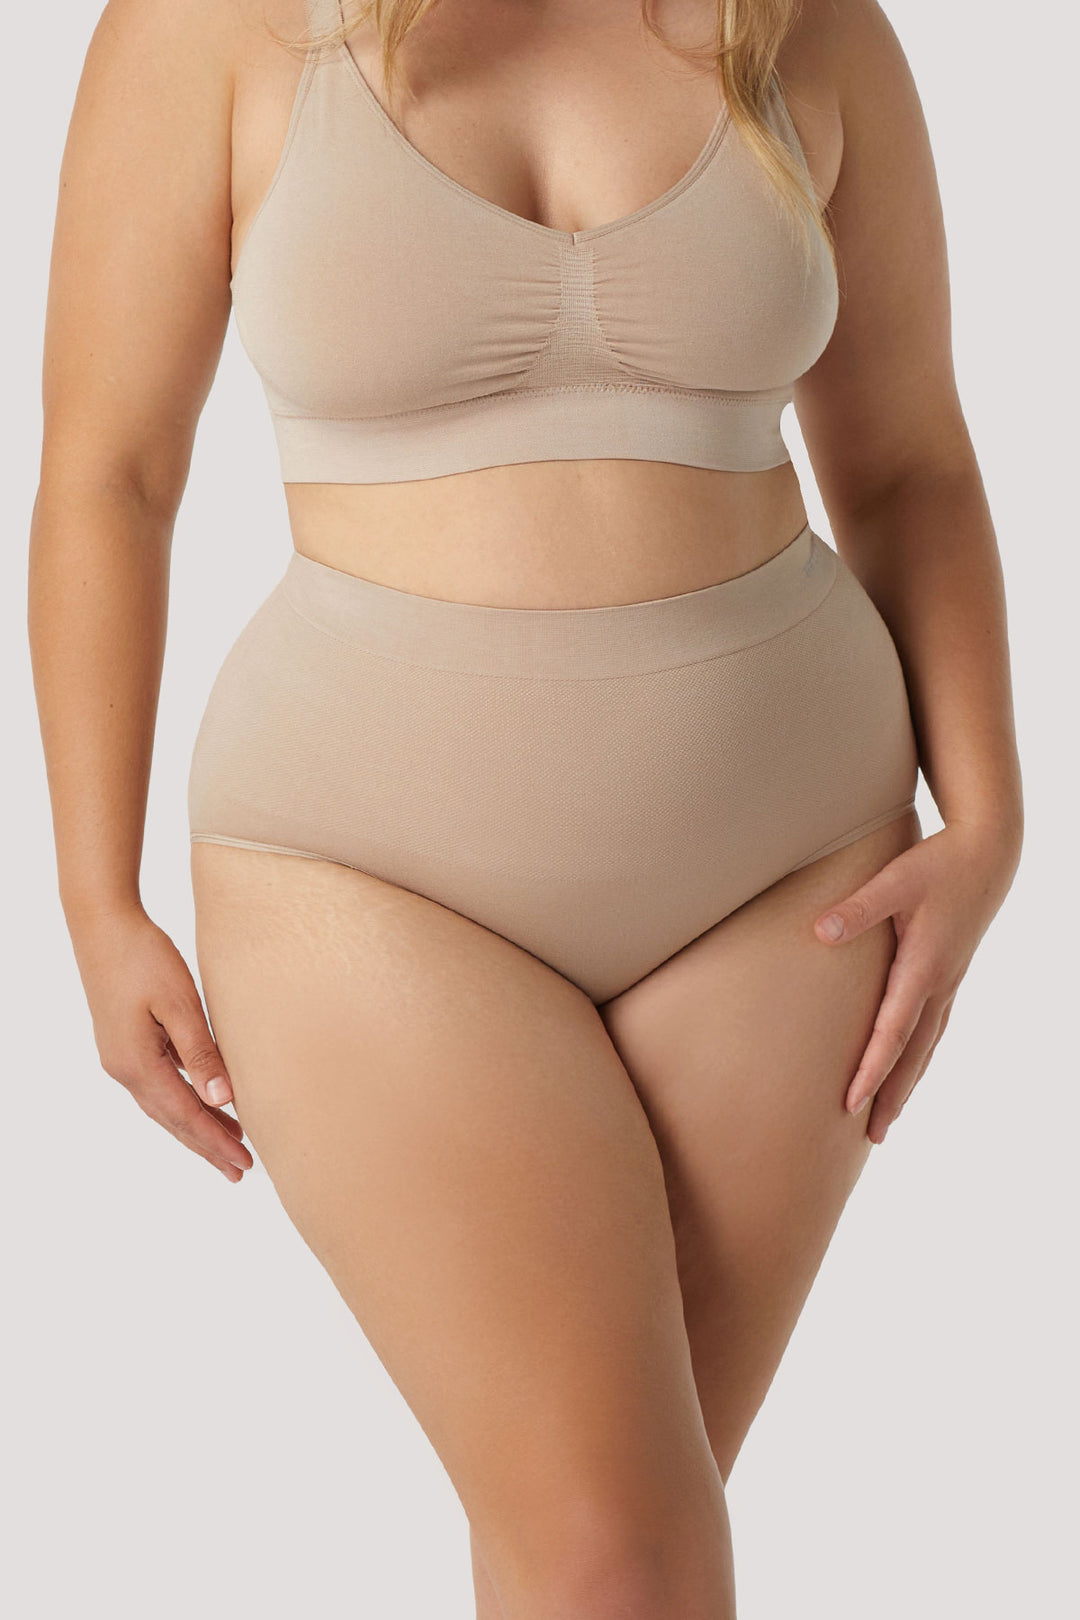 Women's breathable bamboo high waist control and firming underwear | Bella Bodies Australia | Sand | Front